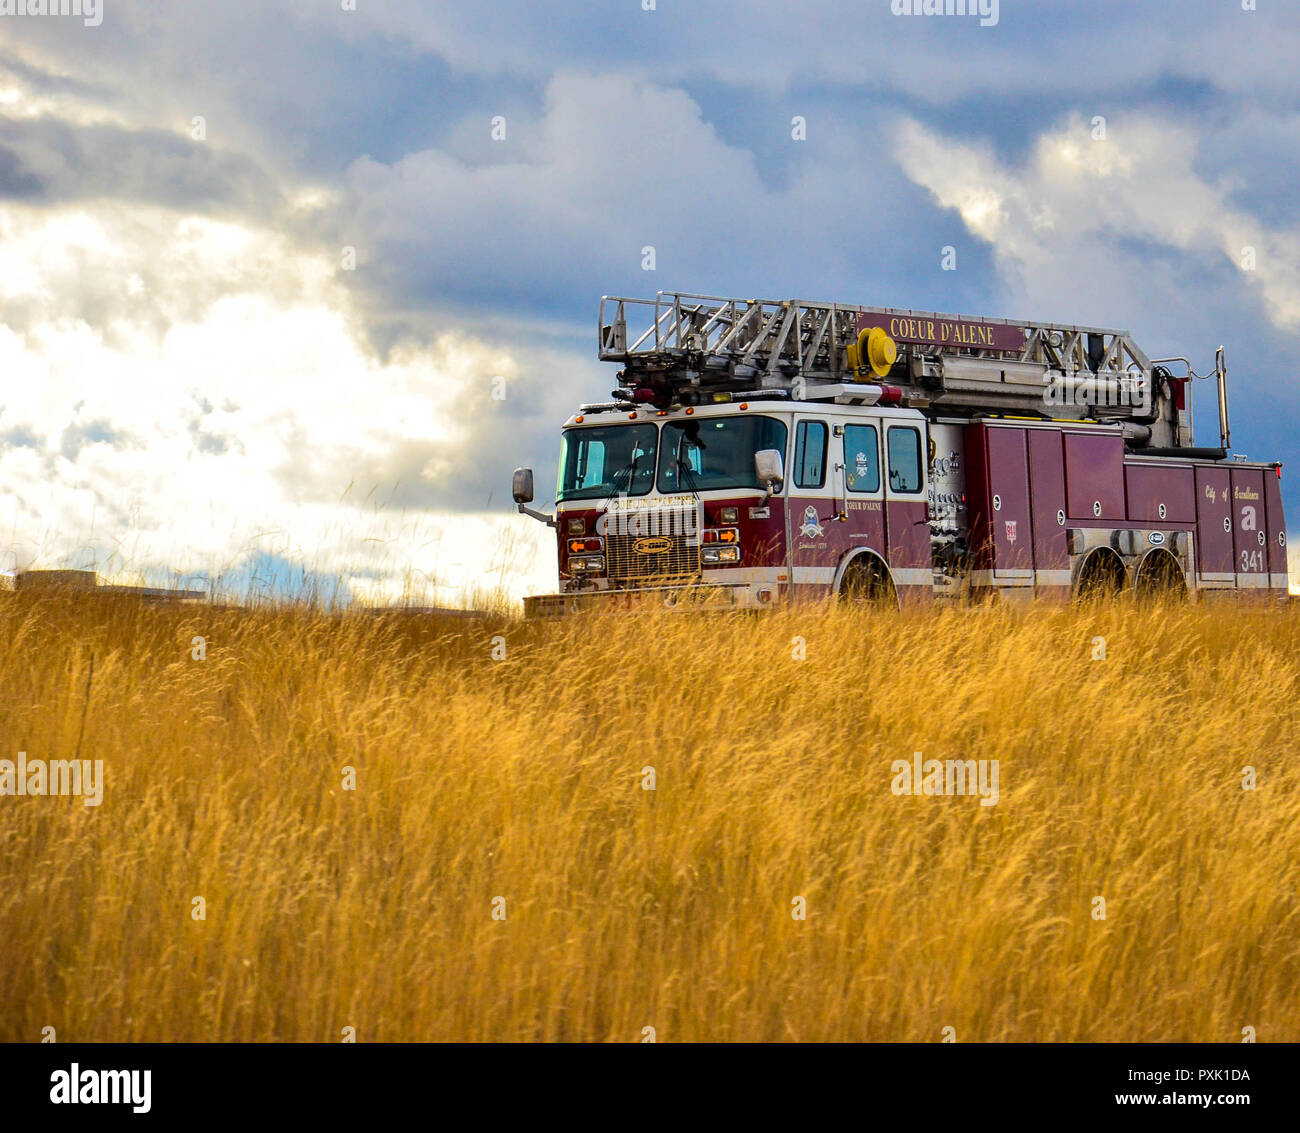 Fire Engine in a grassy field Stock Photo